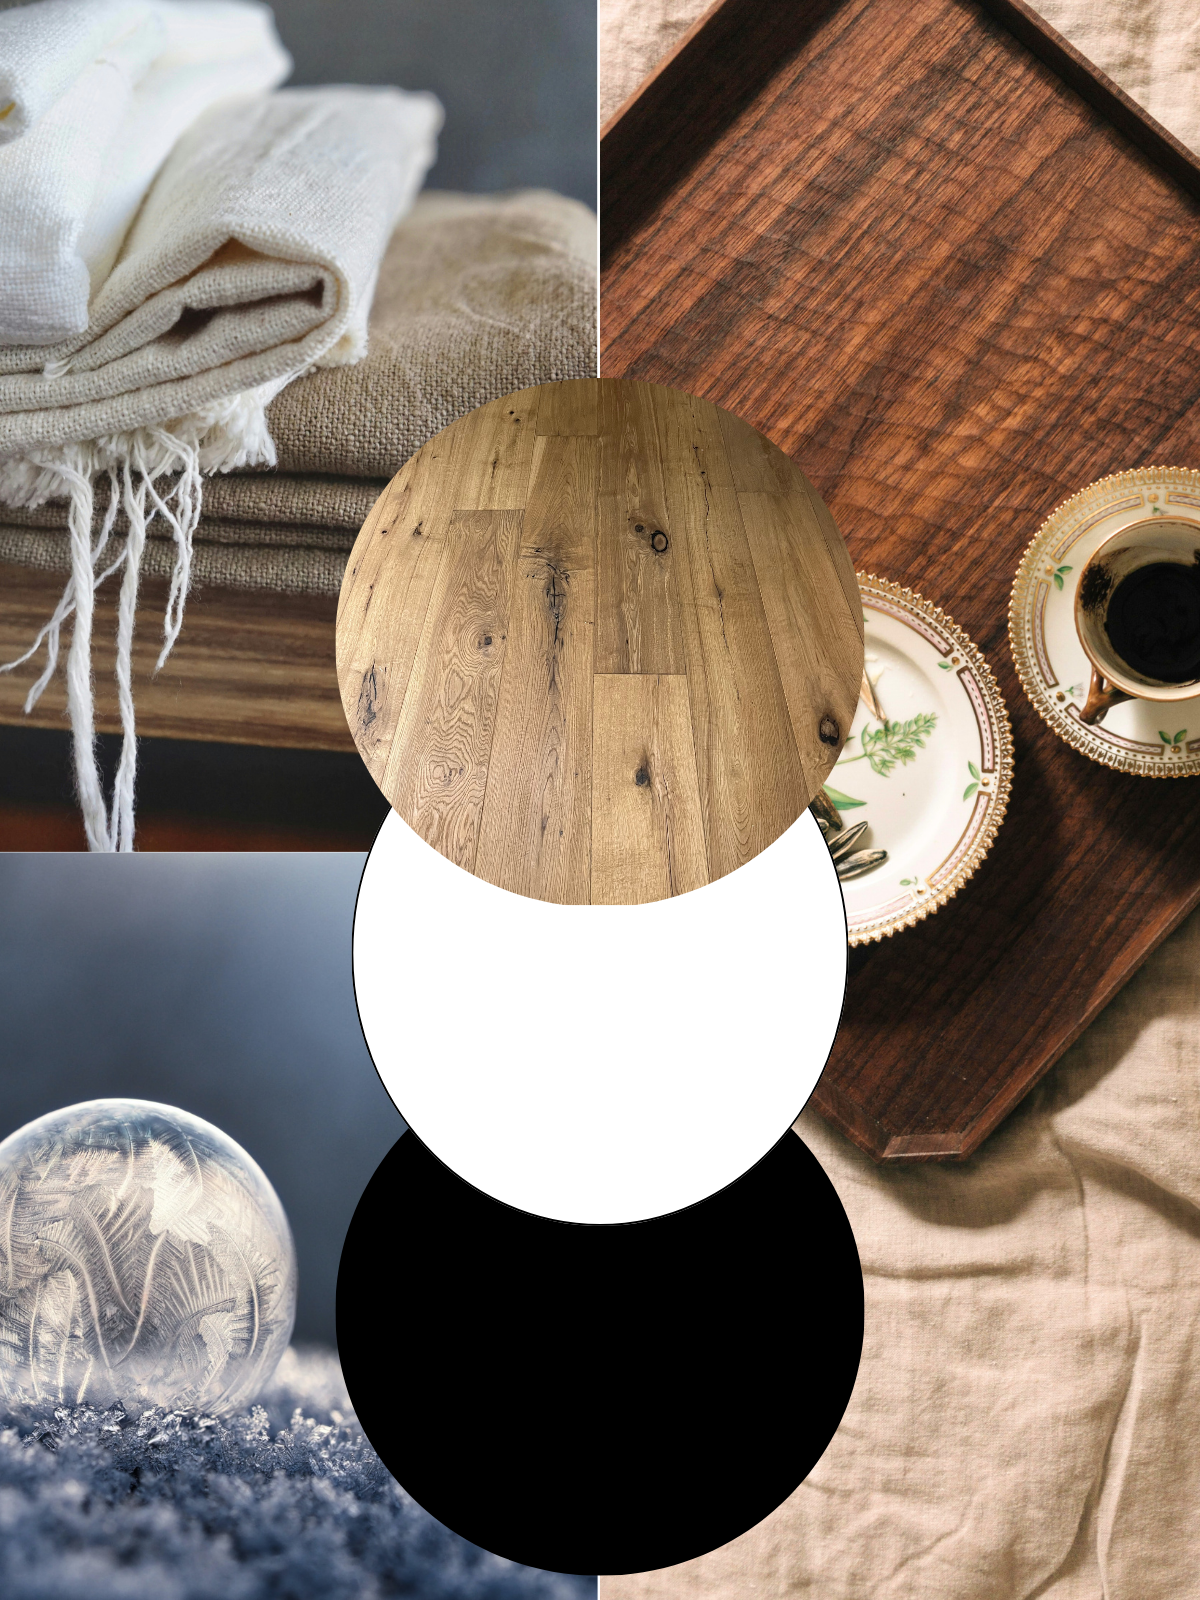 mood board with wood tones, black and white paint, fabrics and glass globe